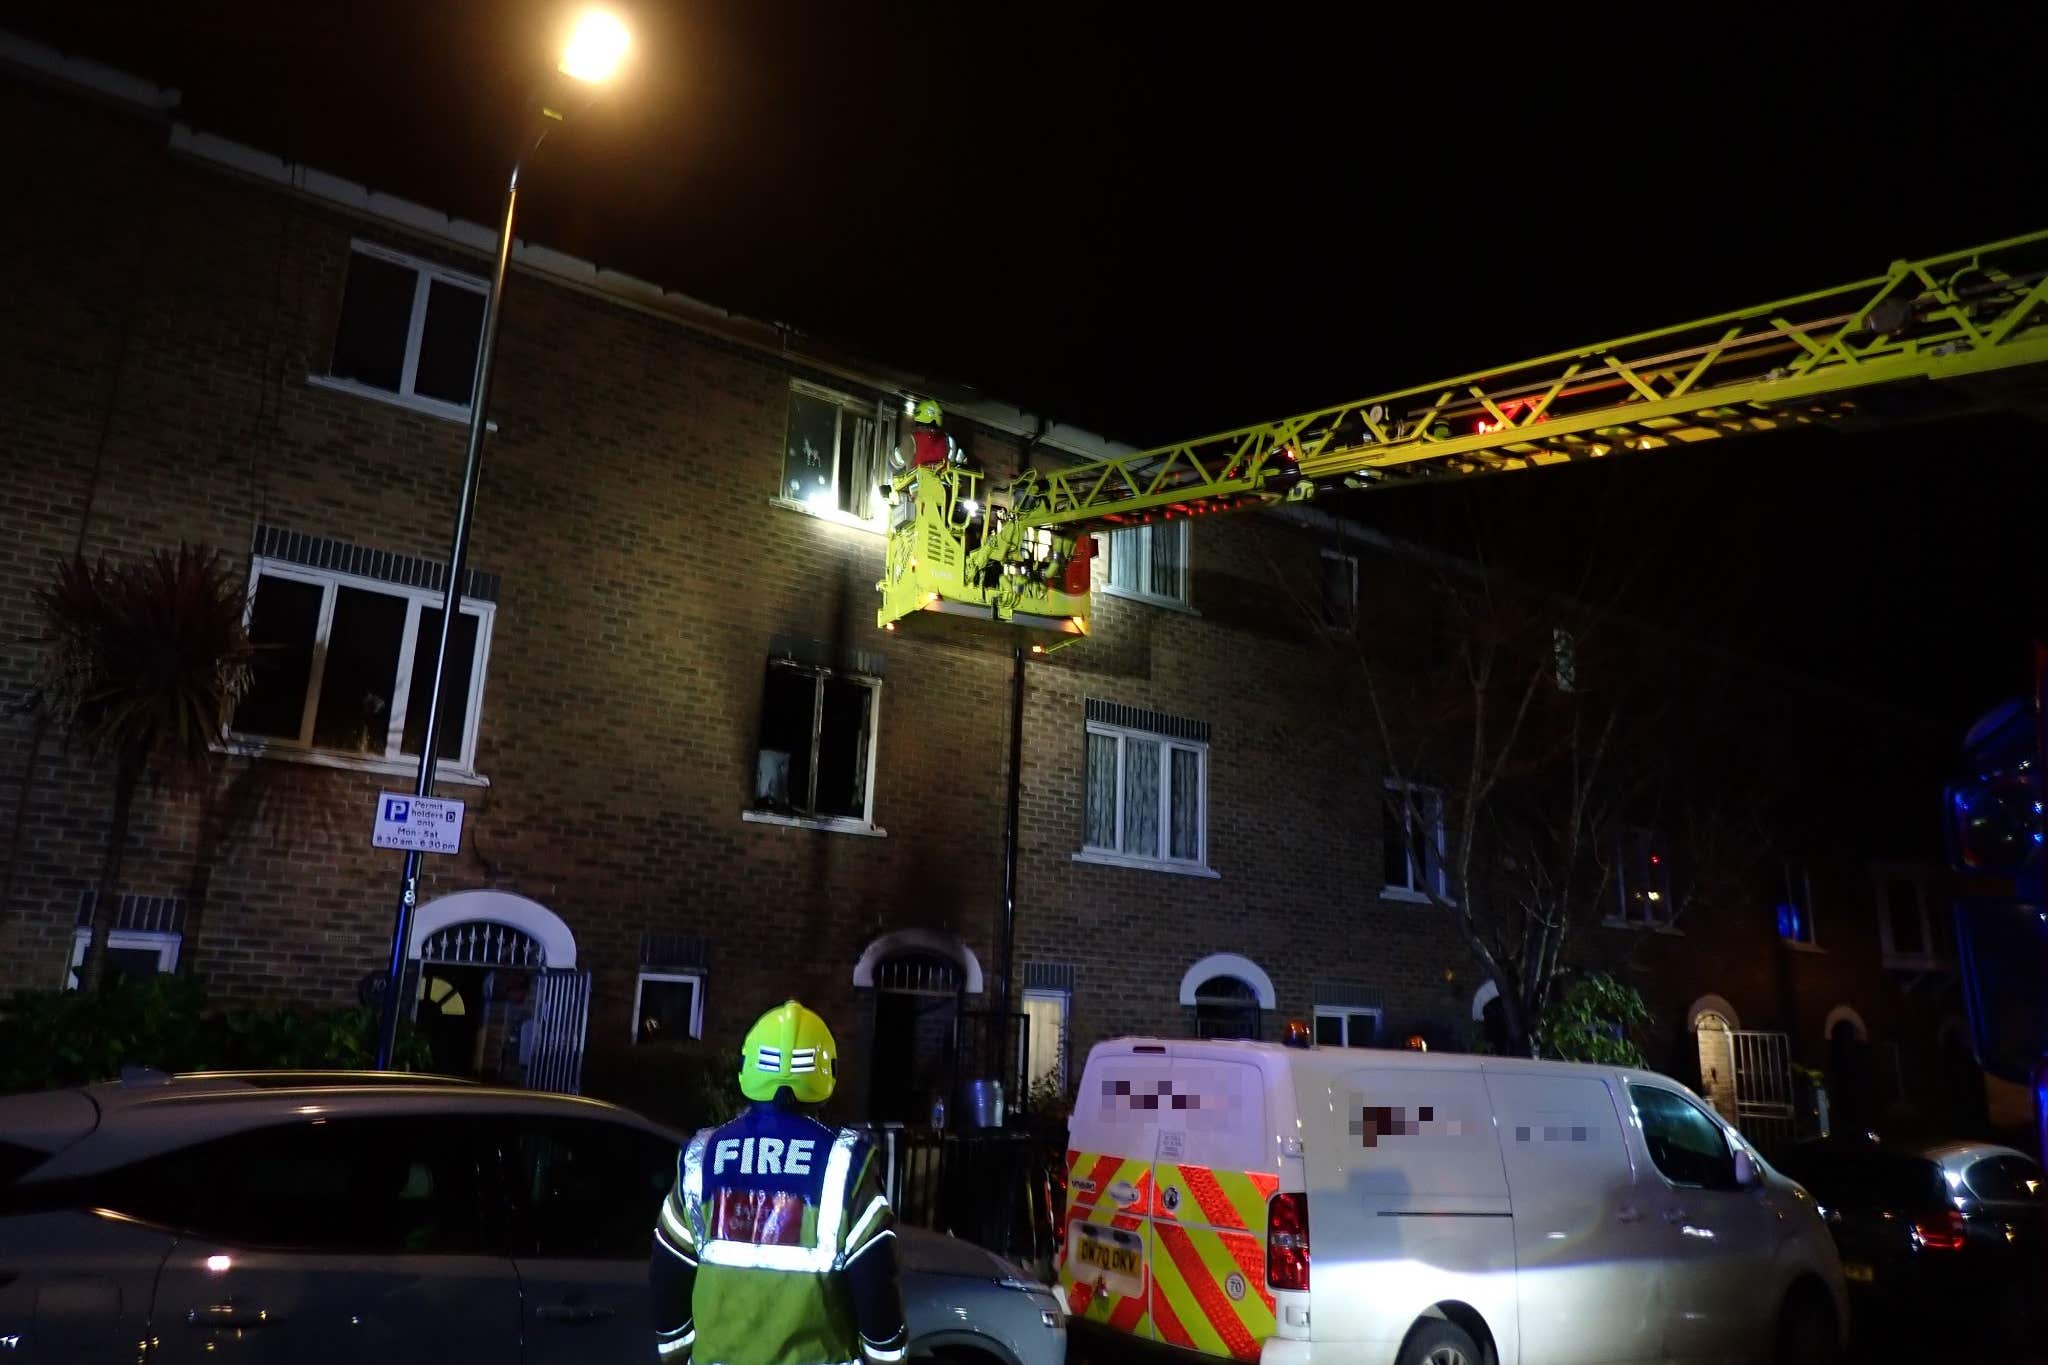 A mother and son are in hospital after being forced to jump from windows to escape an e-bike battery fire in a house (London Fire Brigade/PA)